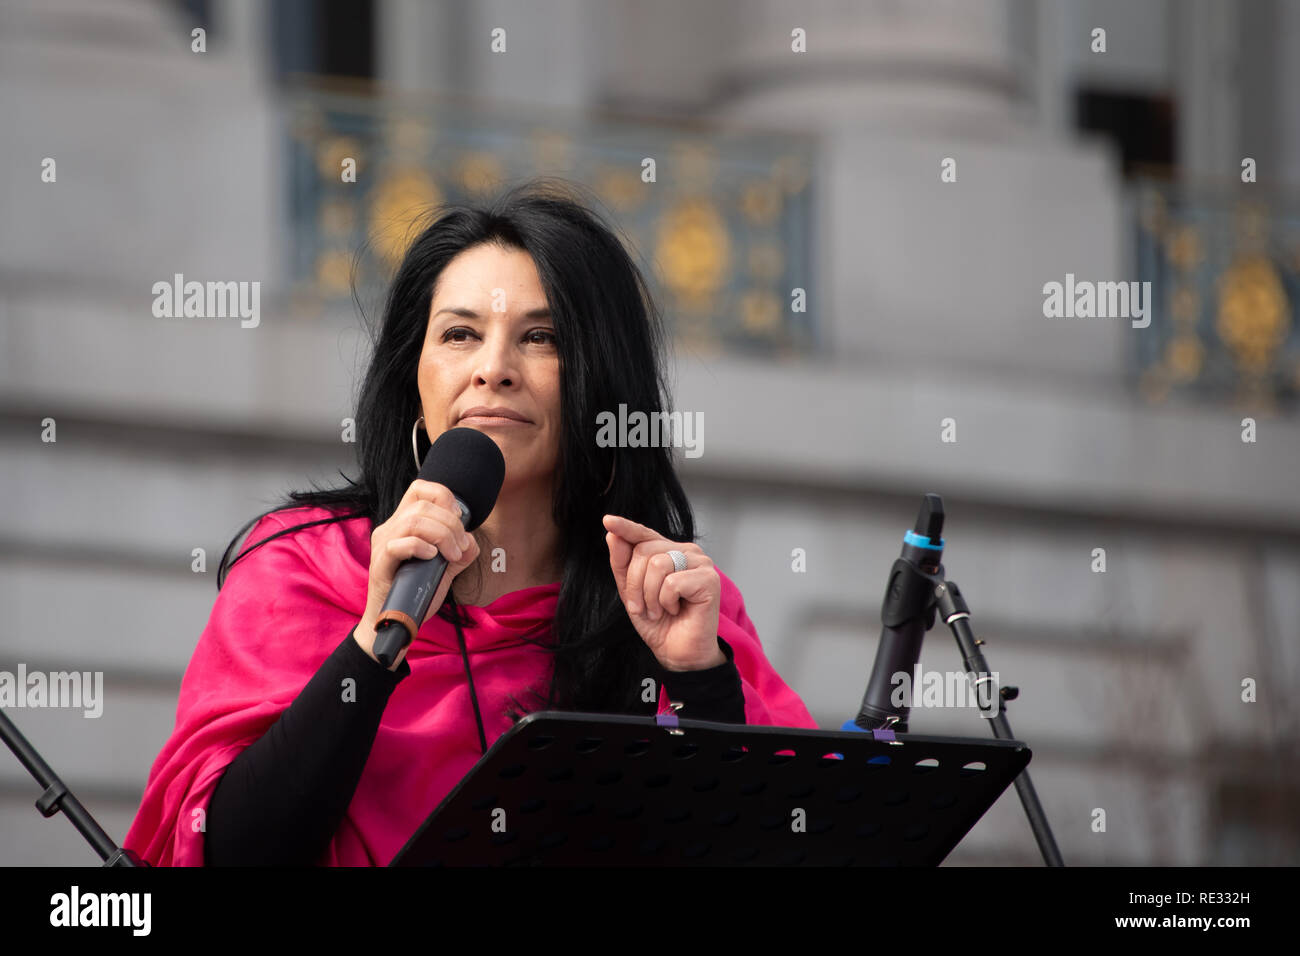 San Francisco, USA. 19th January, 2019. The Women's March San Francisco begins with a rally at Civic Center Plaza. Gilda Gonzales, CEO of Planned Parenthood NorCal (Northern California) addresses the audience. Credit: Shelly Rivoli/Alamy Live News Stock Photo